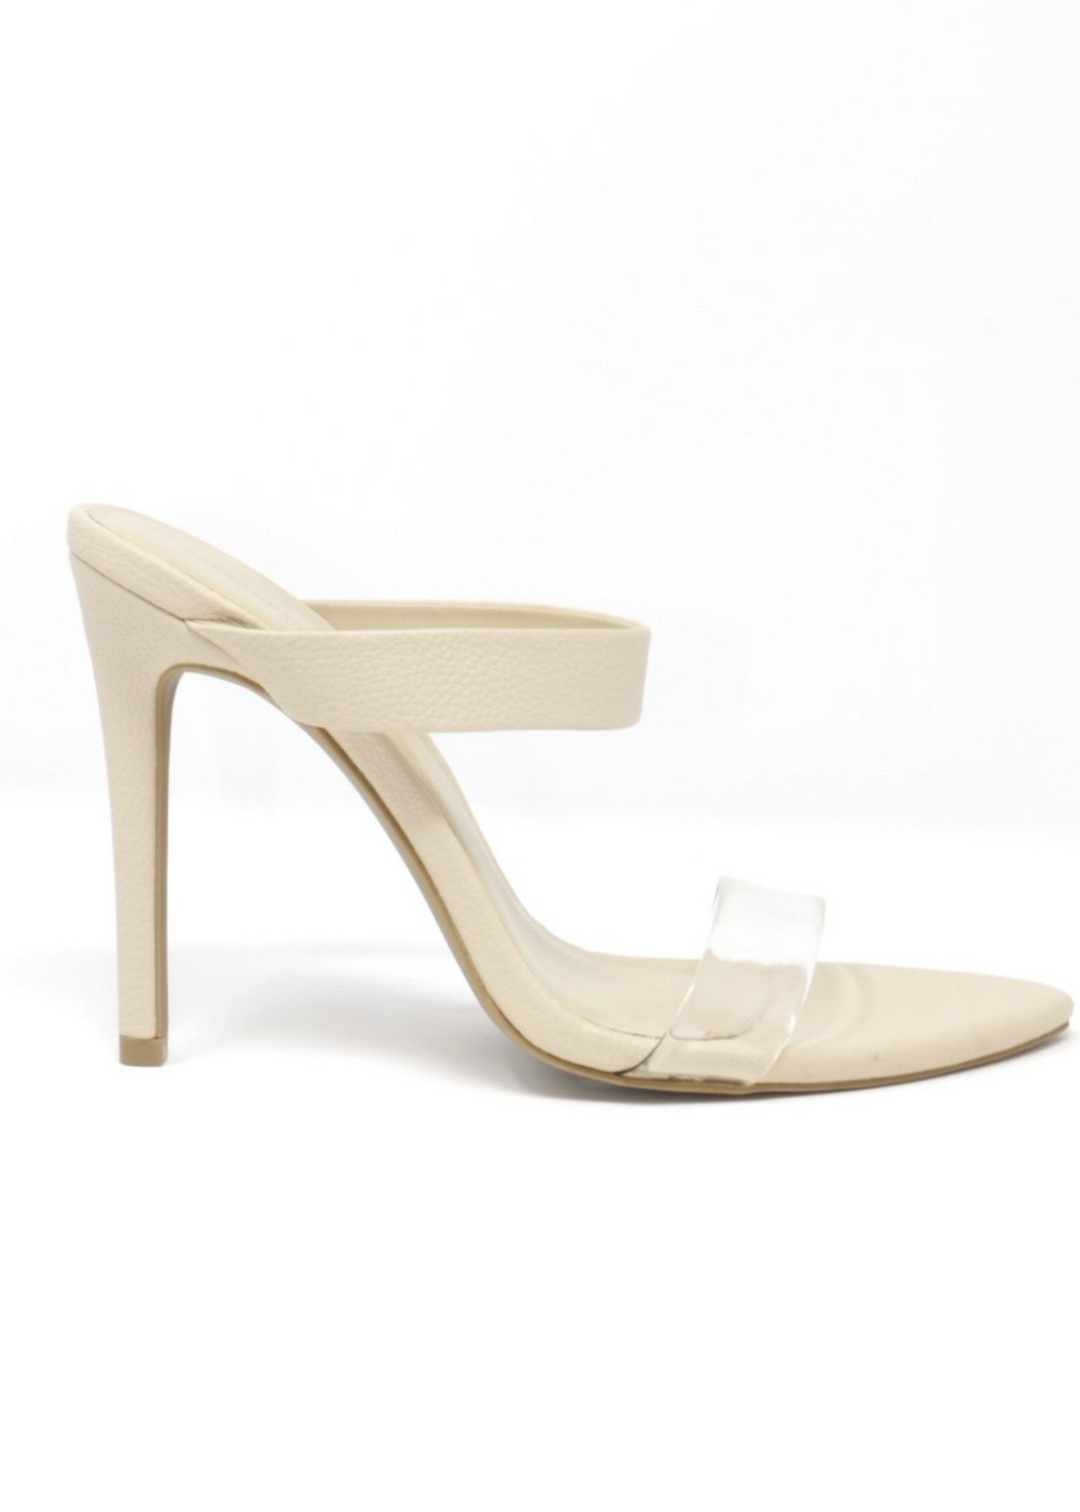 Audrey Heels with Clear Strap in Nude